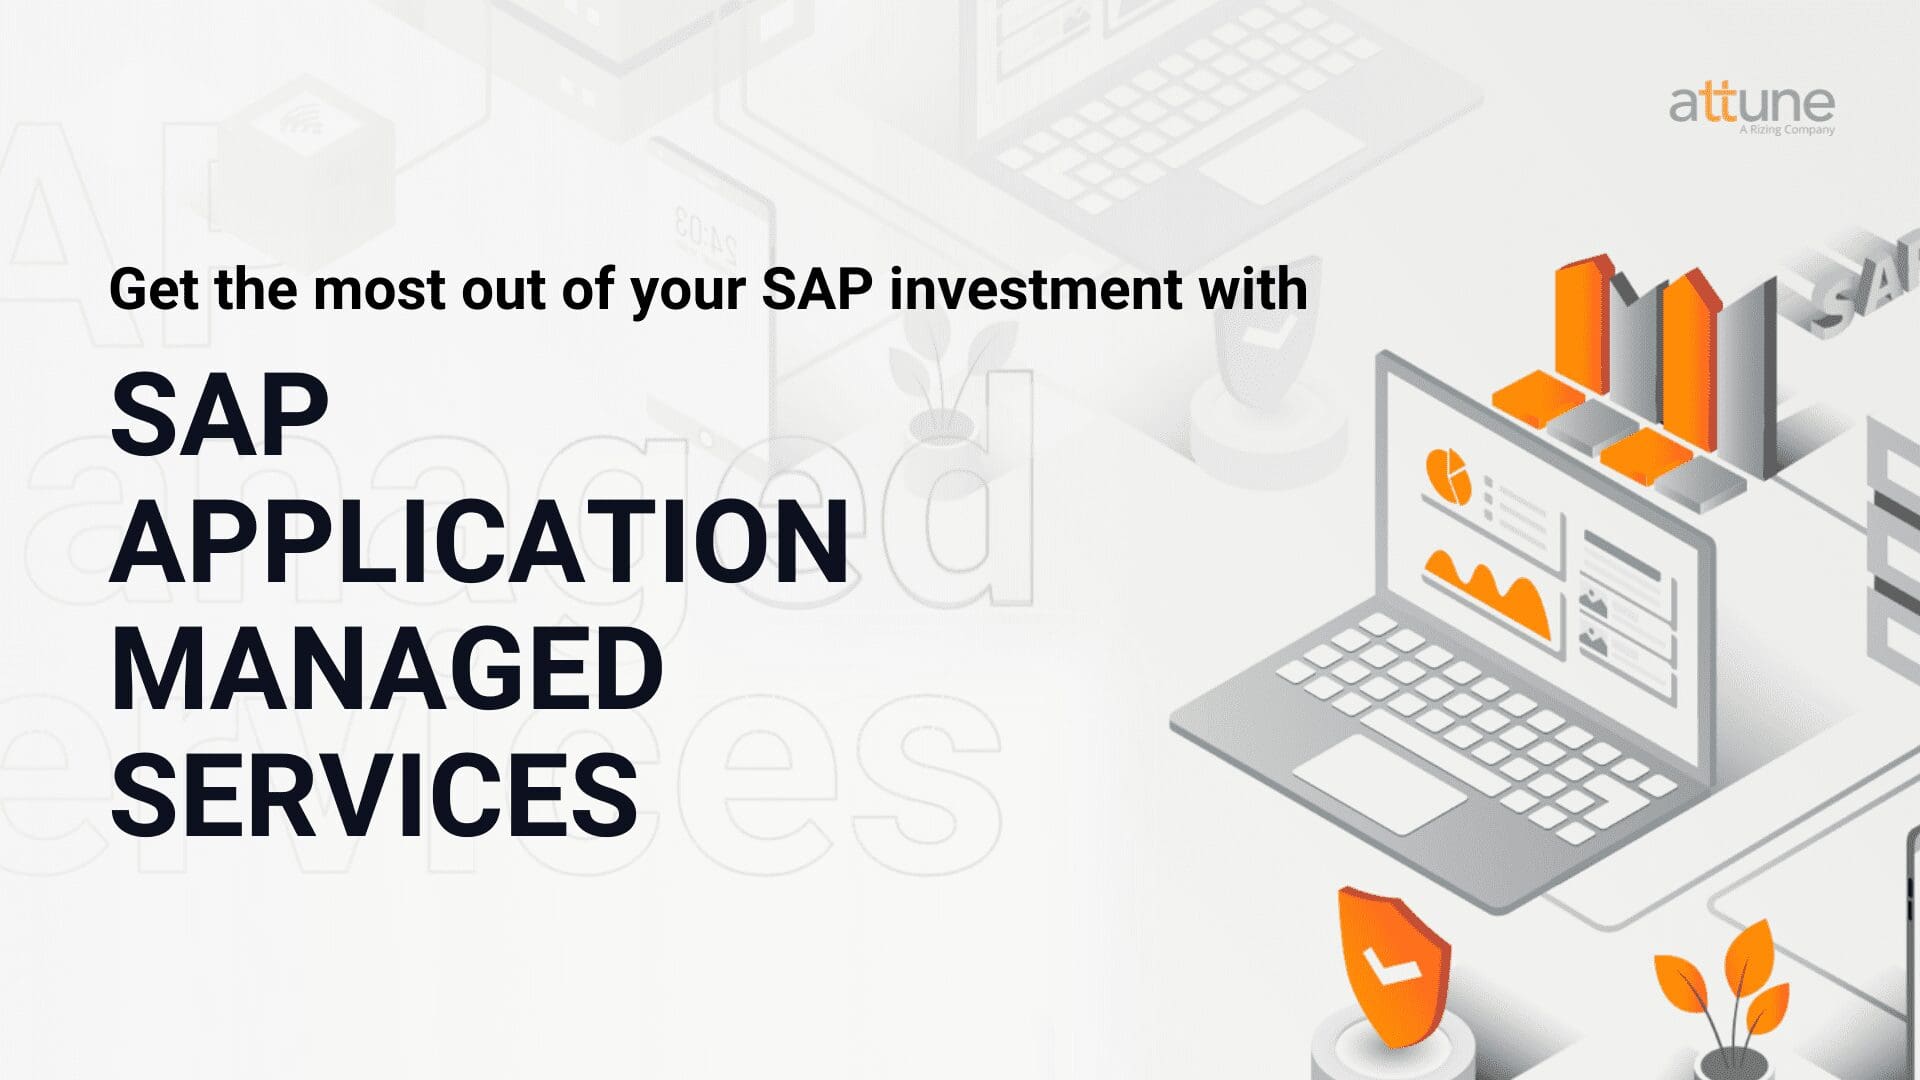 Benefits of SAP Application Managed Services for Fashion Companies.